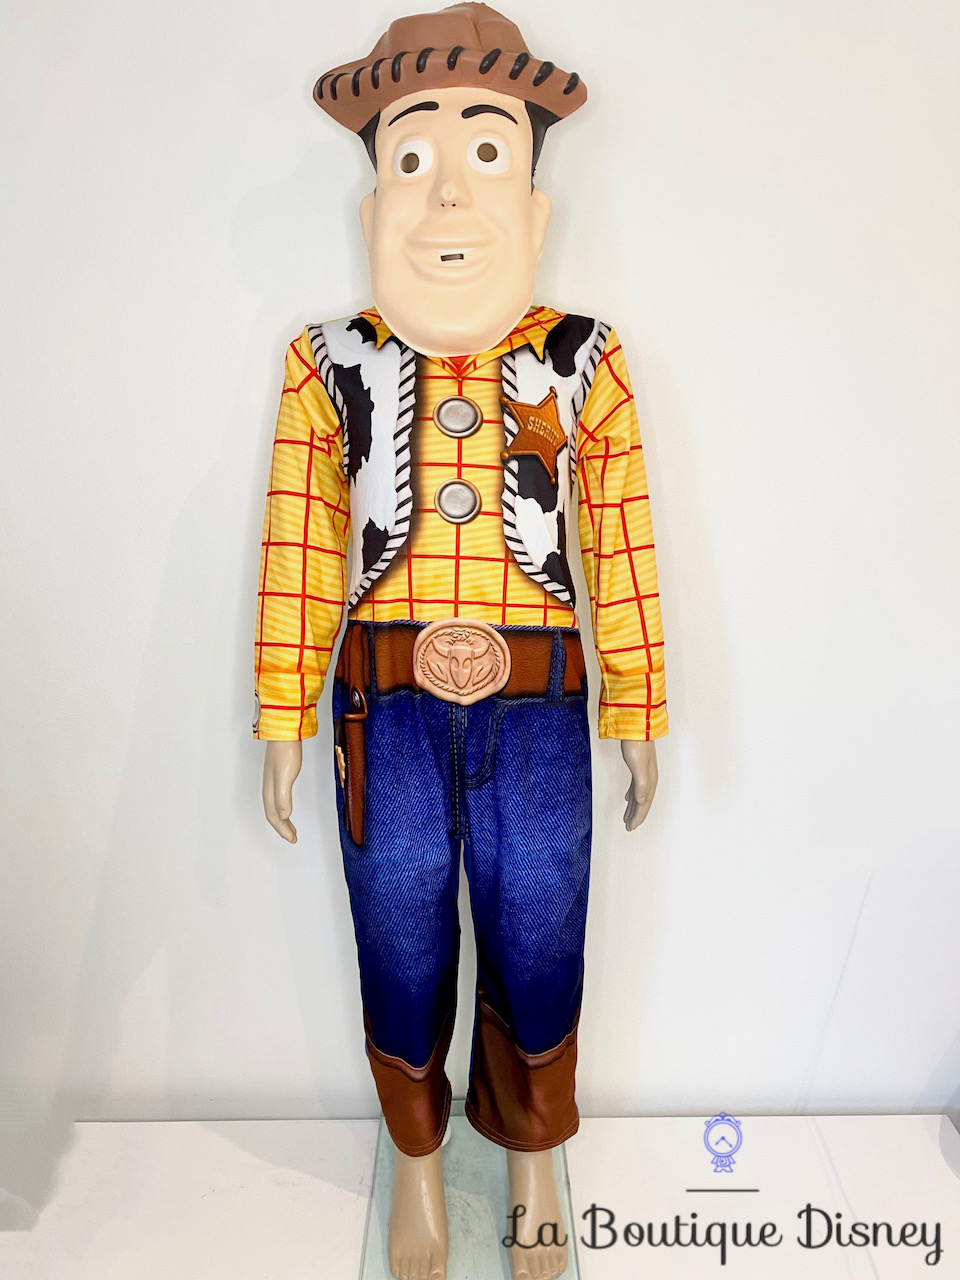 déguisement-woody-toy-story-disney-rubies-taille-3-4-ans-cow-boy-masque-13